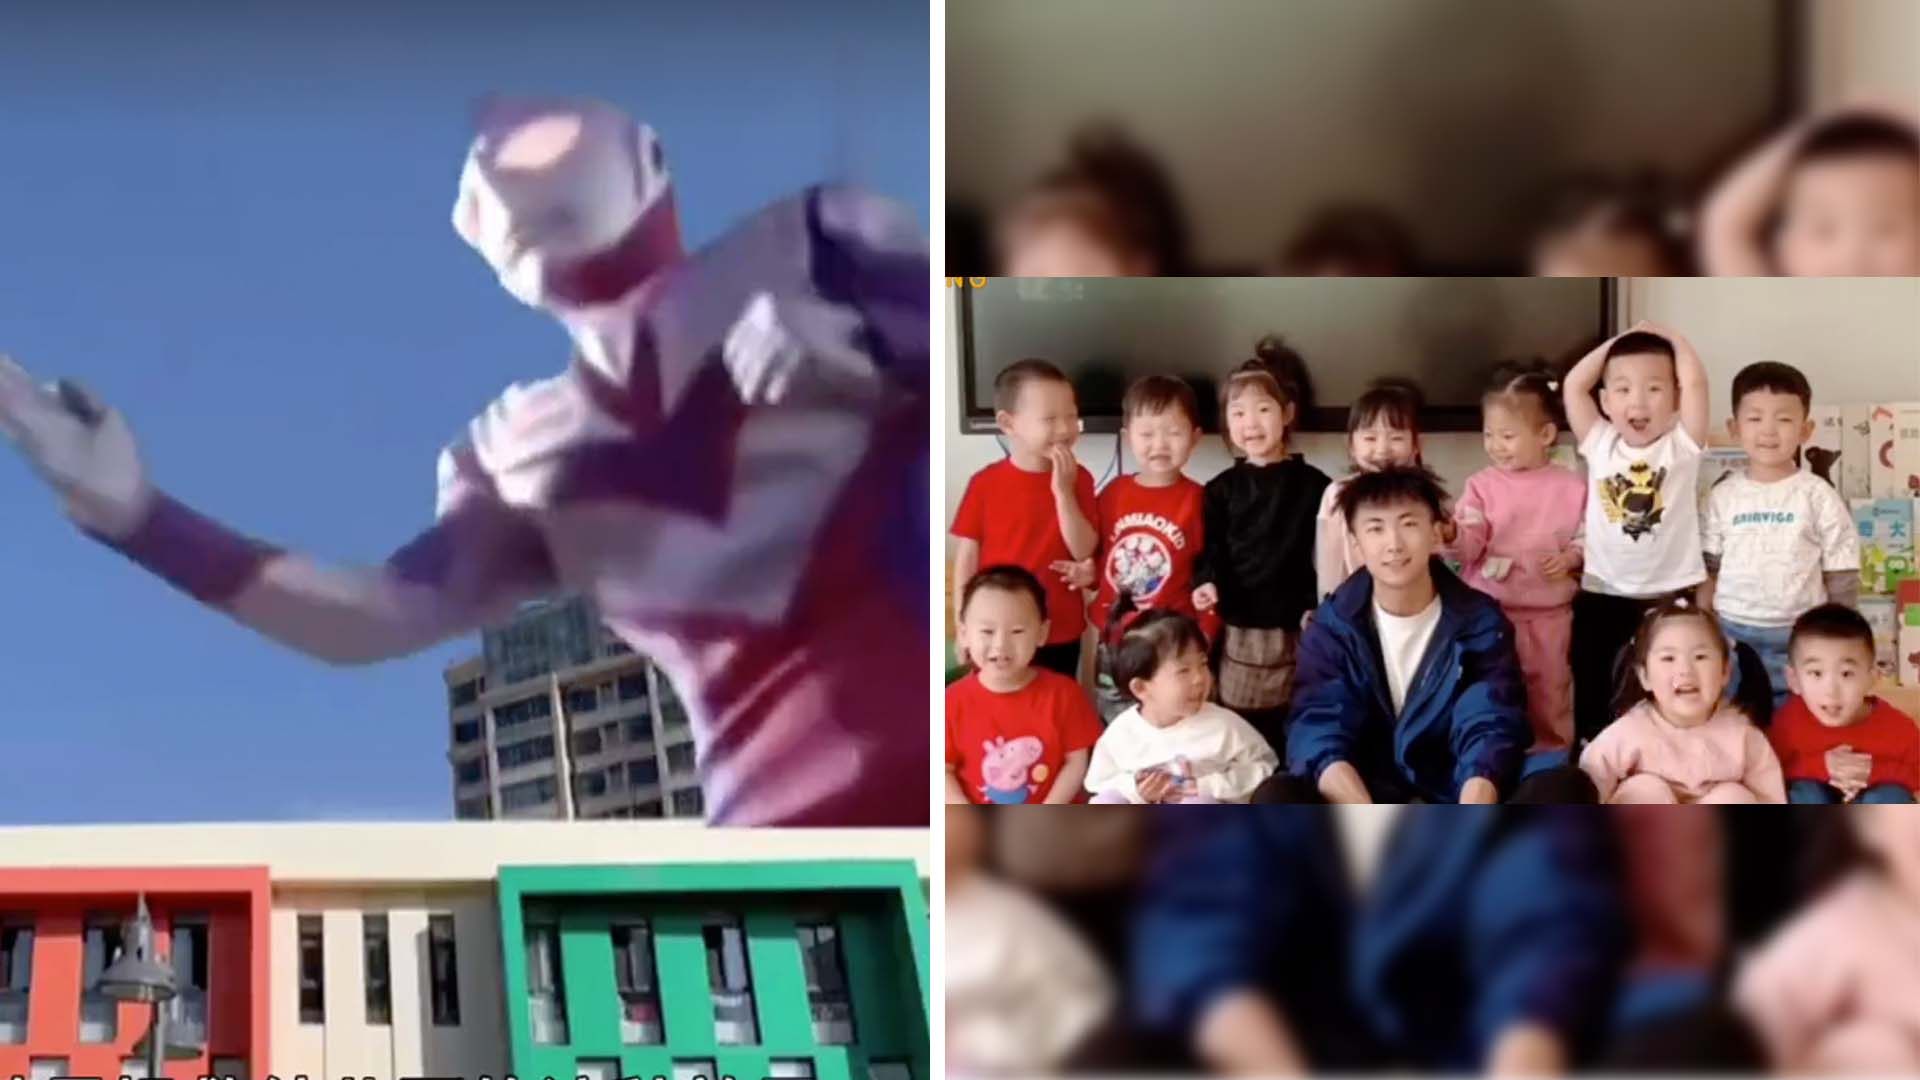 A Chinese preschool teacher made a video of himself transforming into Ultraman for his preschool students. Photo: SCMP composite